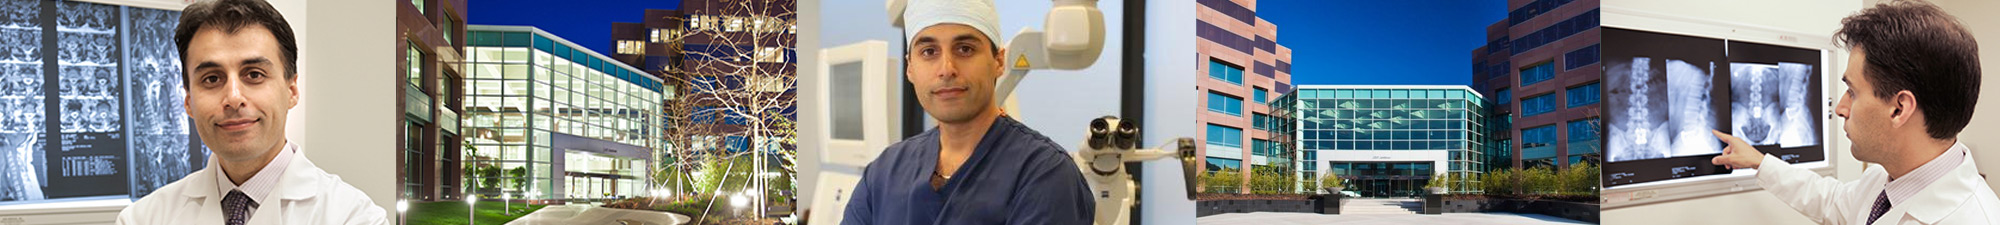 Learn more about Super Doctor, spine specialist, Dr. Hamid Mir in Los Angeles and Orange County